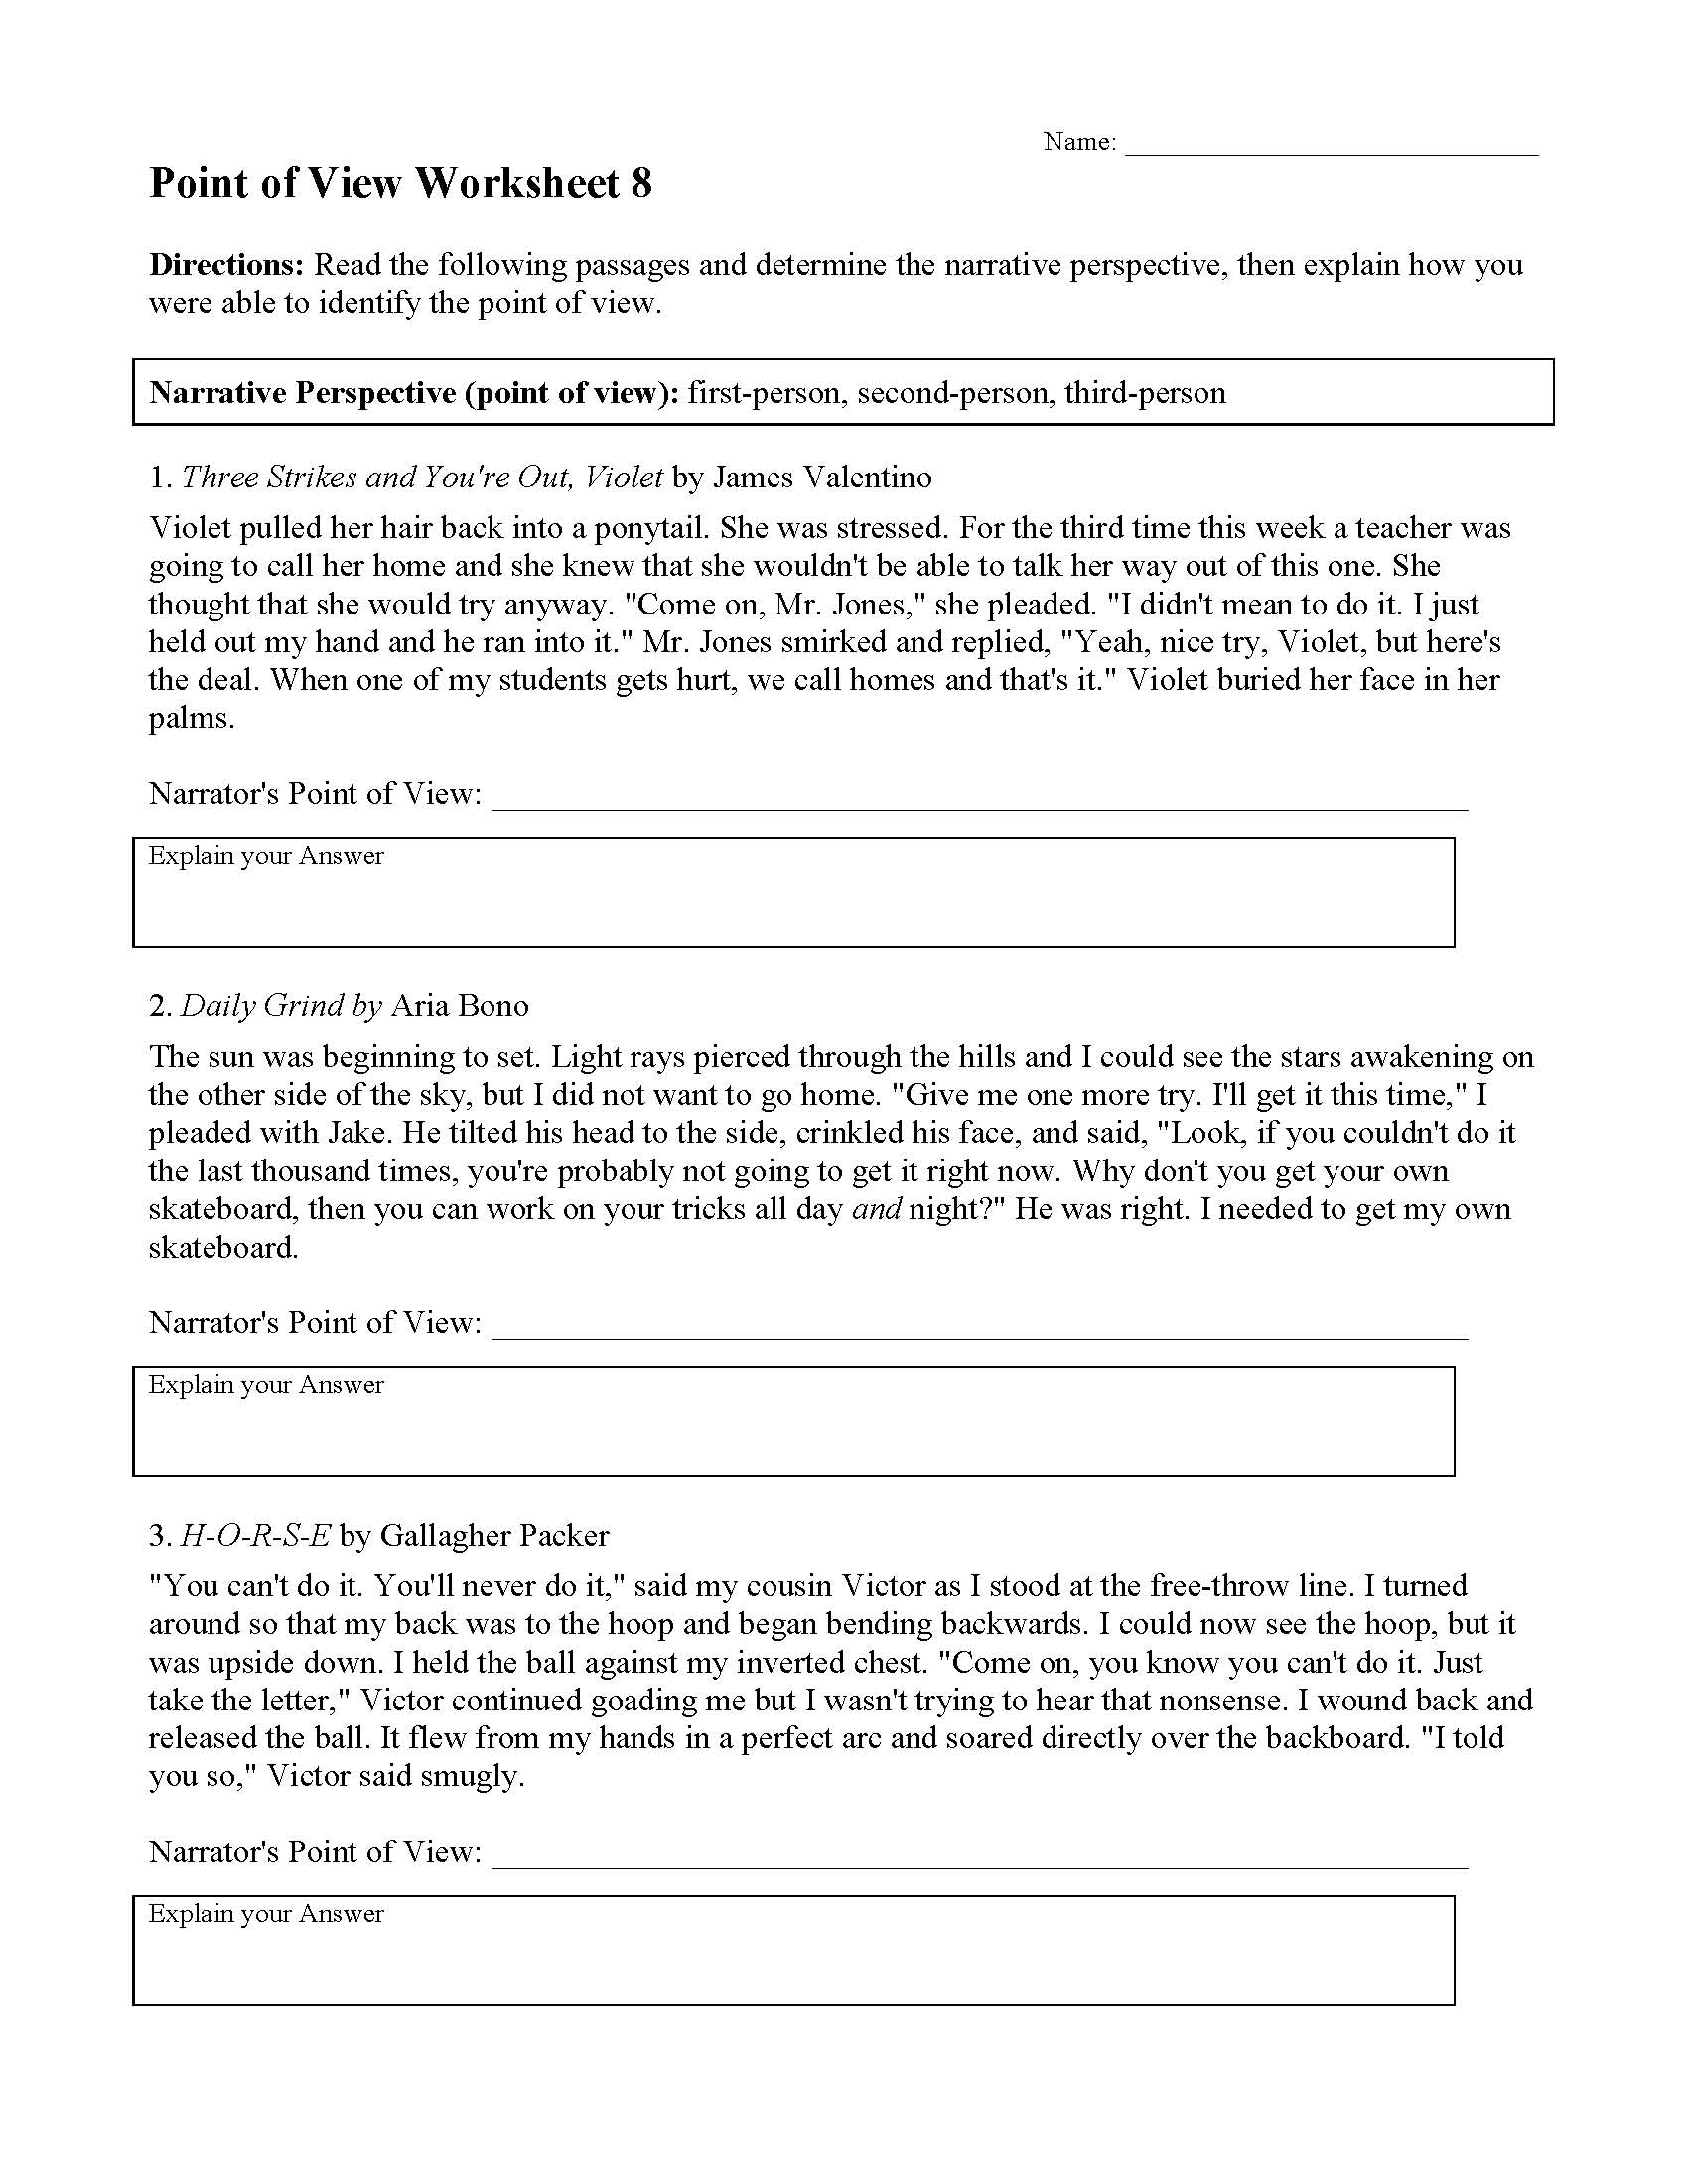 point-of-view-worksheet-8-preview